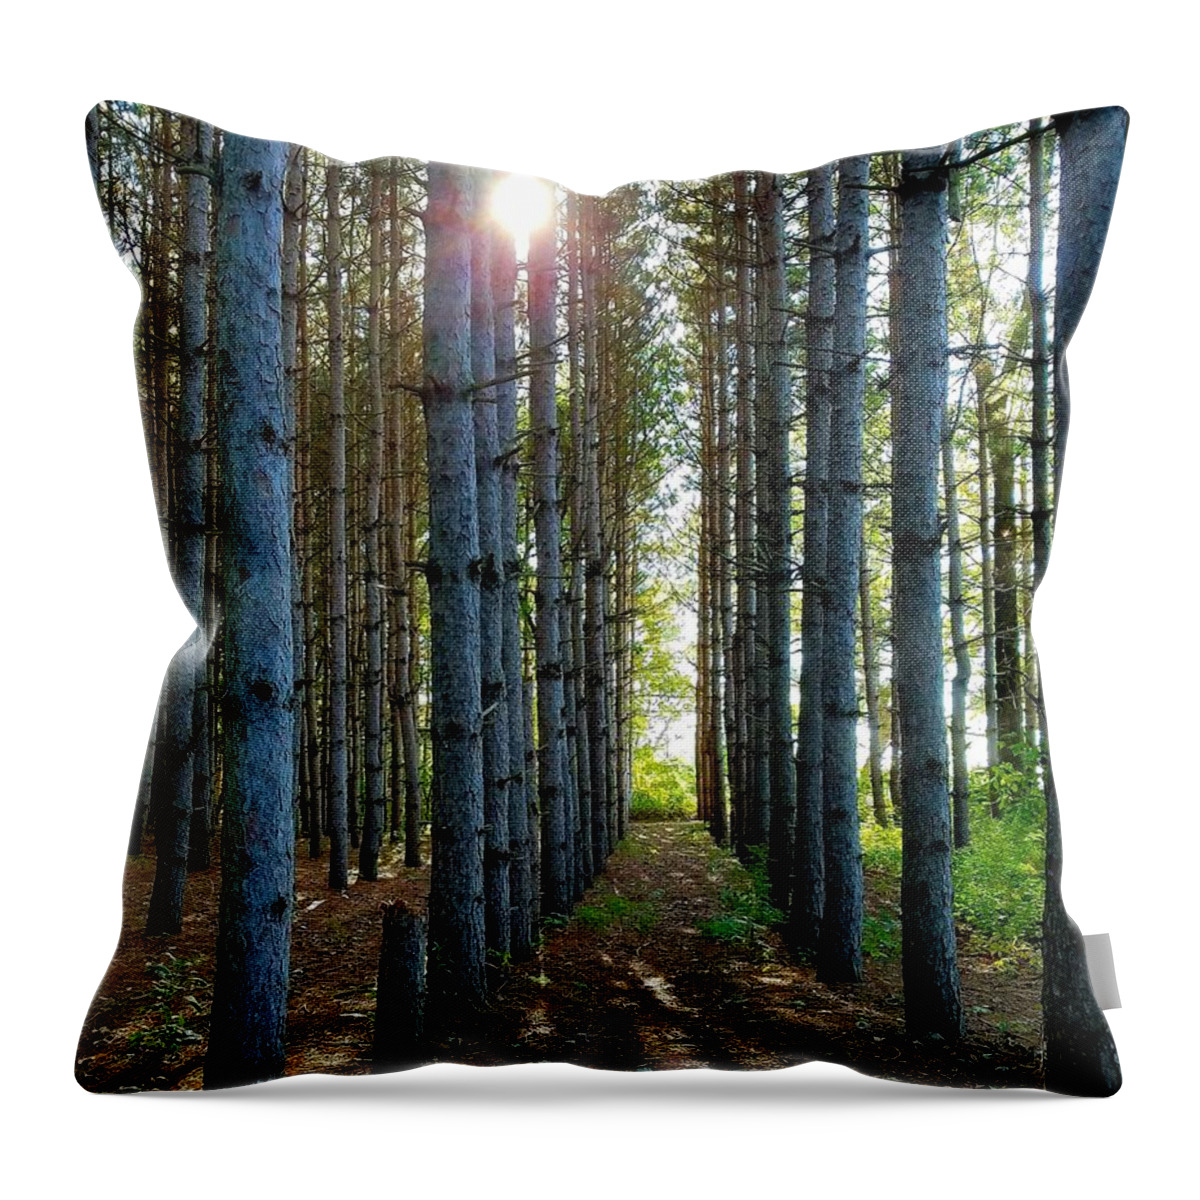 Sunlight Throw Pillow featuring the photograph Sunlight Through the Forest Trees by Vic Ritchey